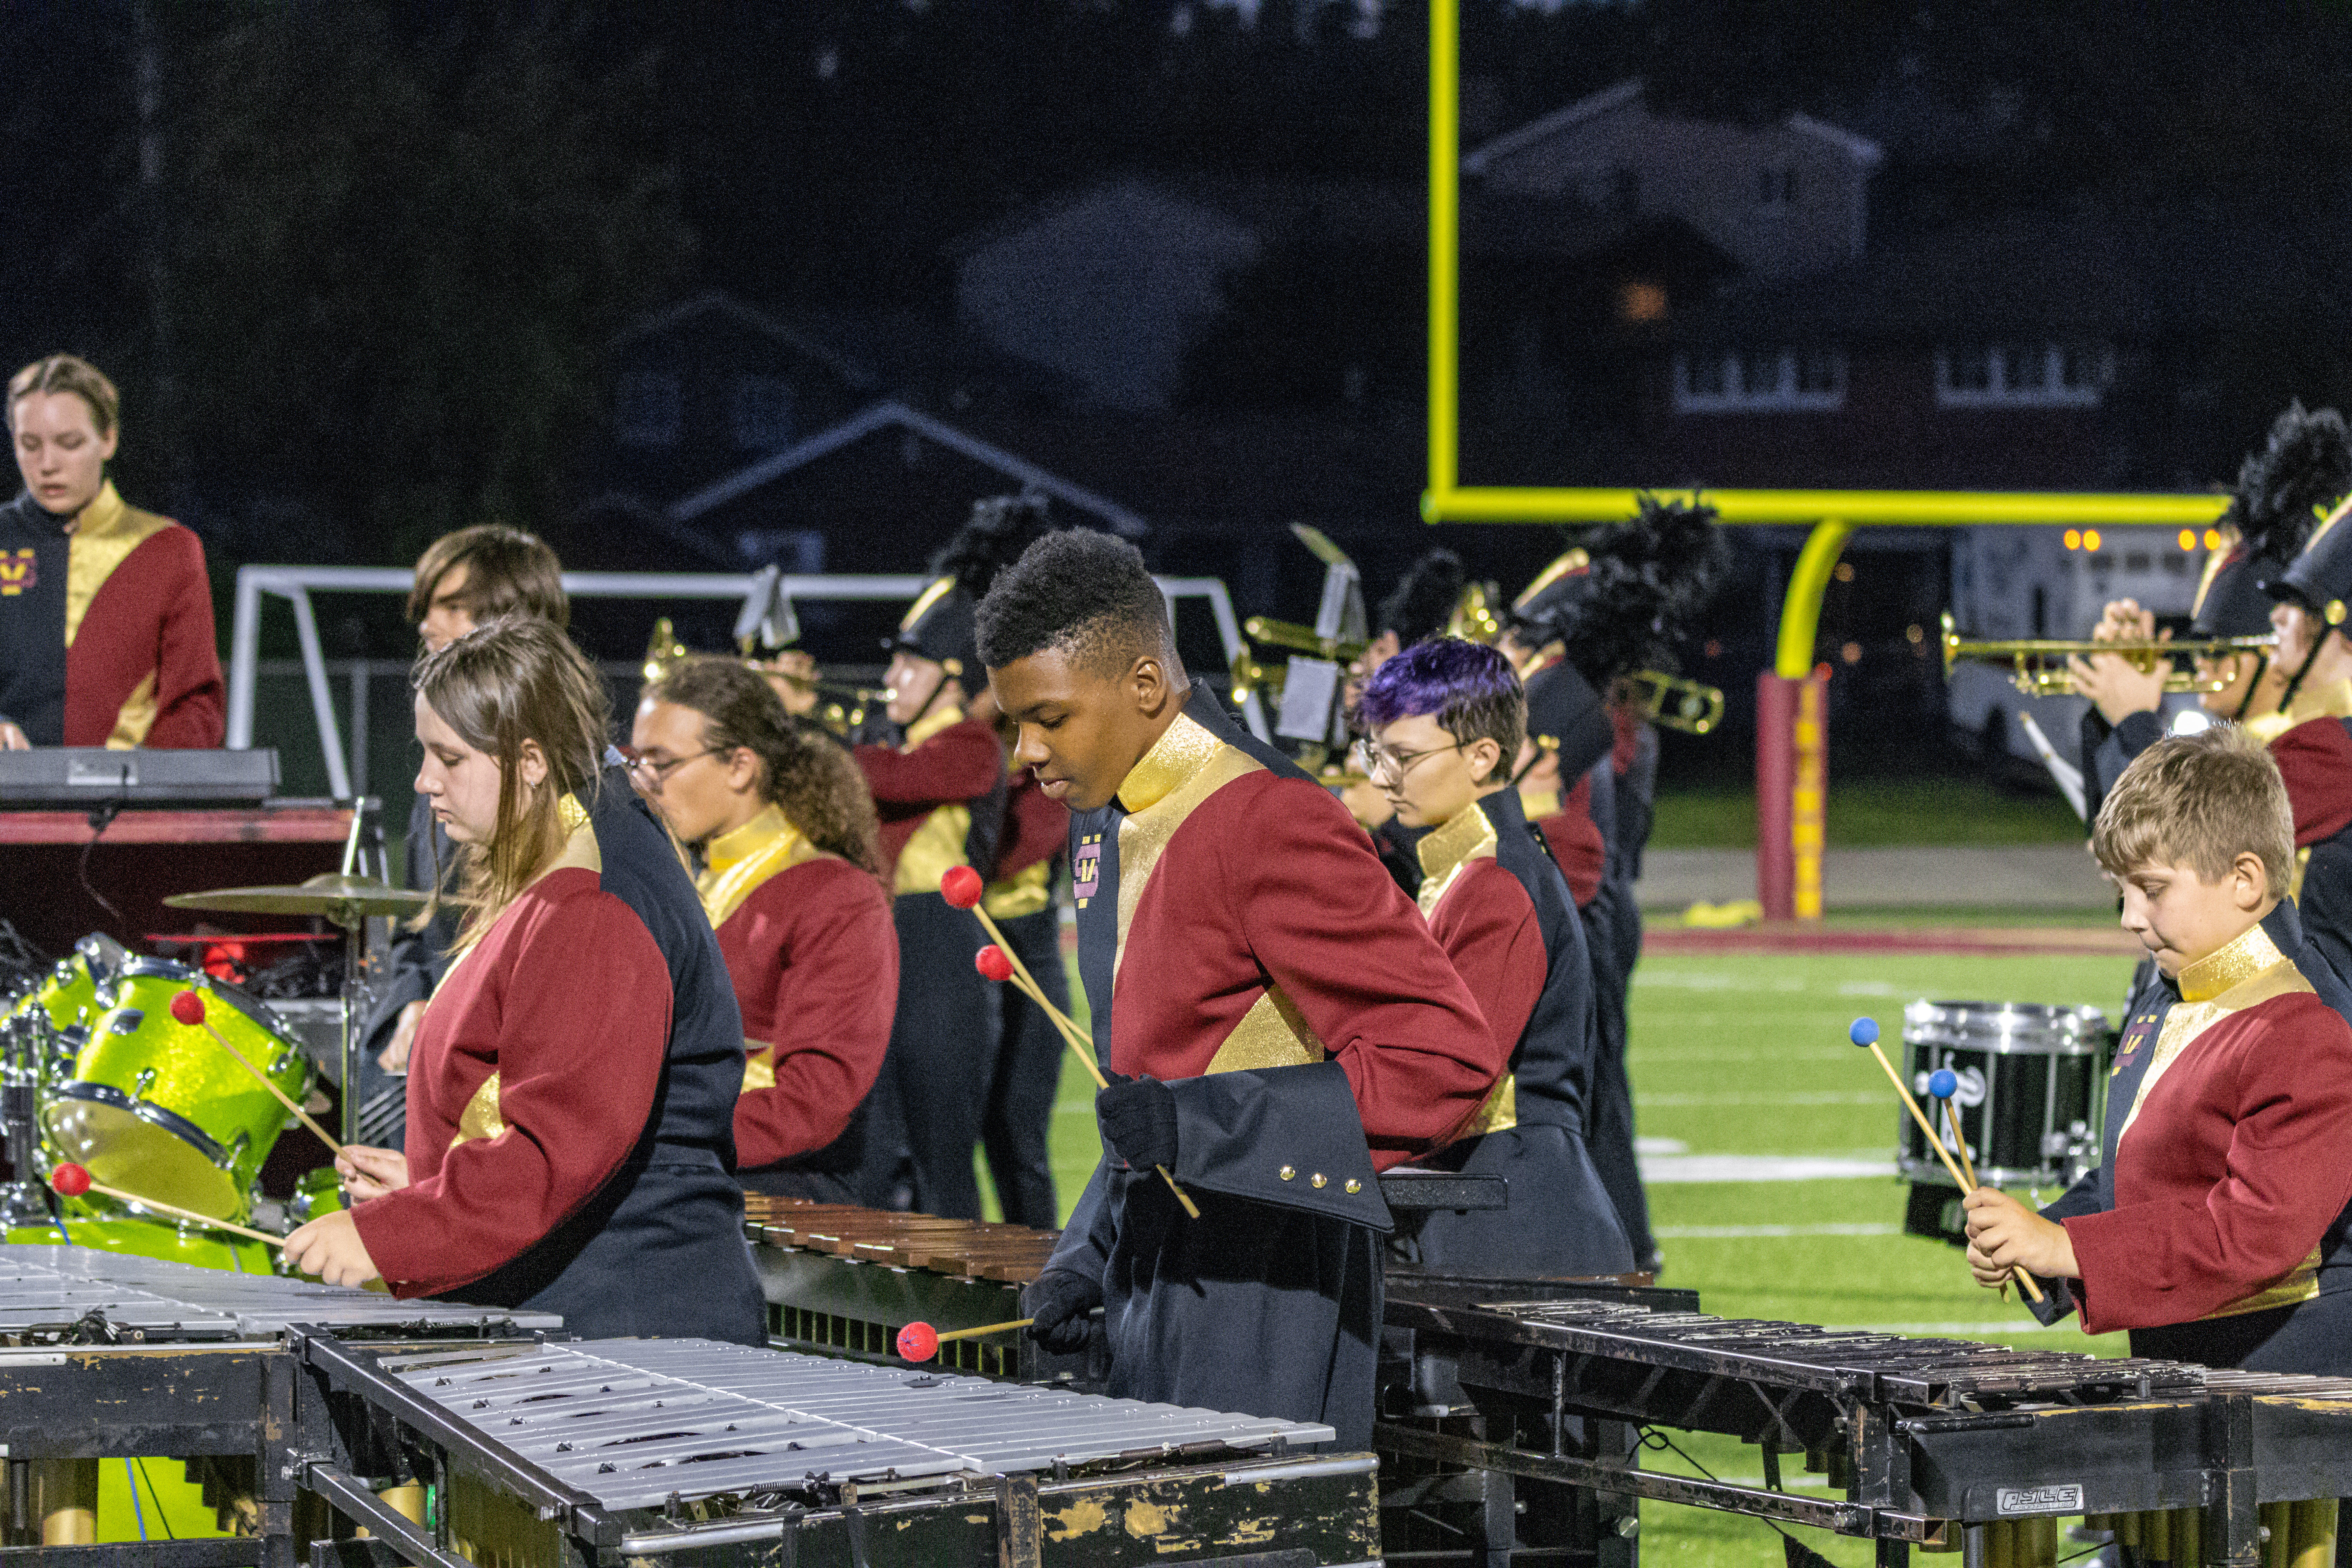 The pit of the Steel Valley Marching Band